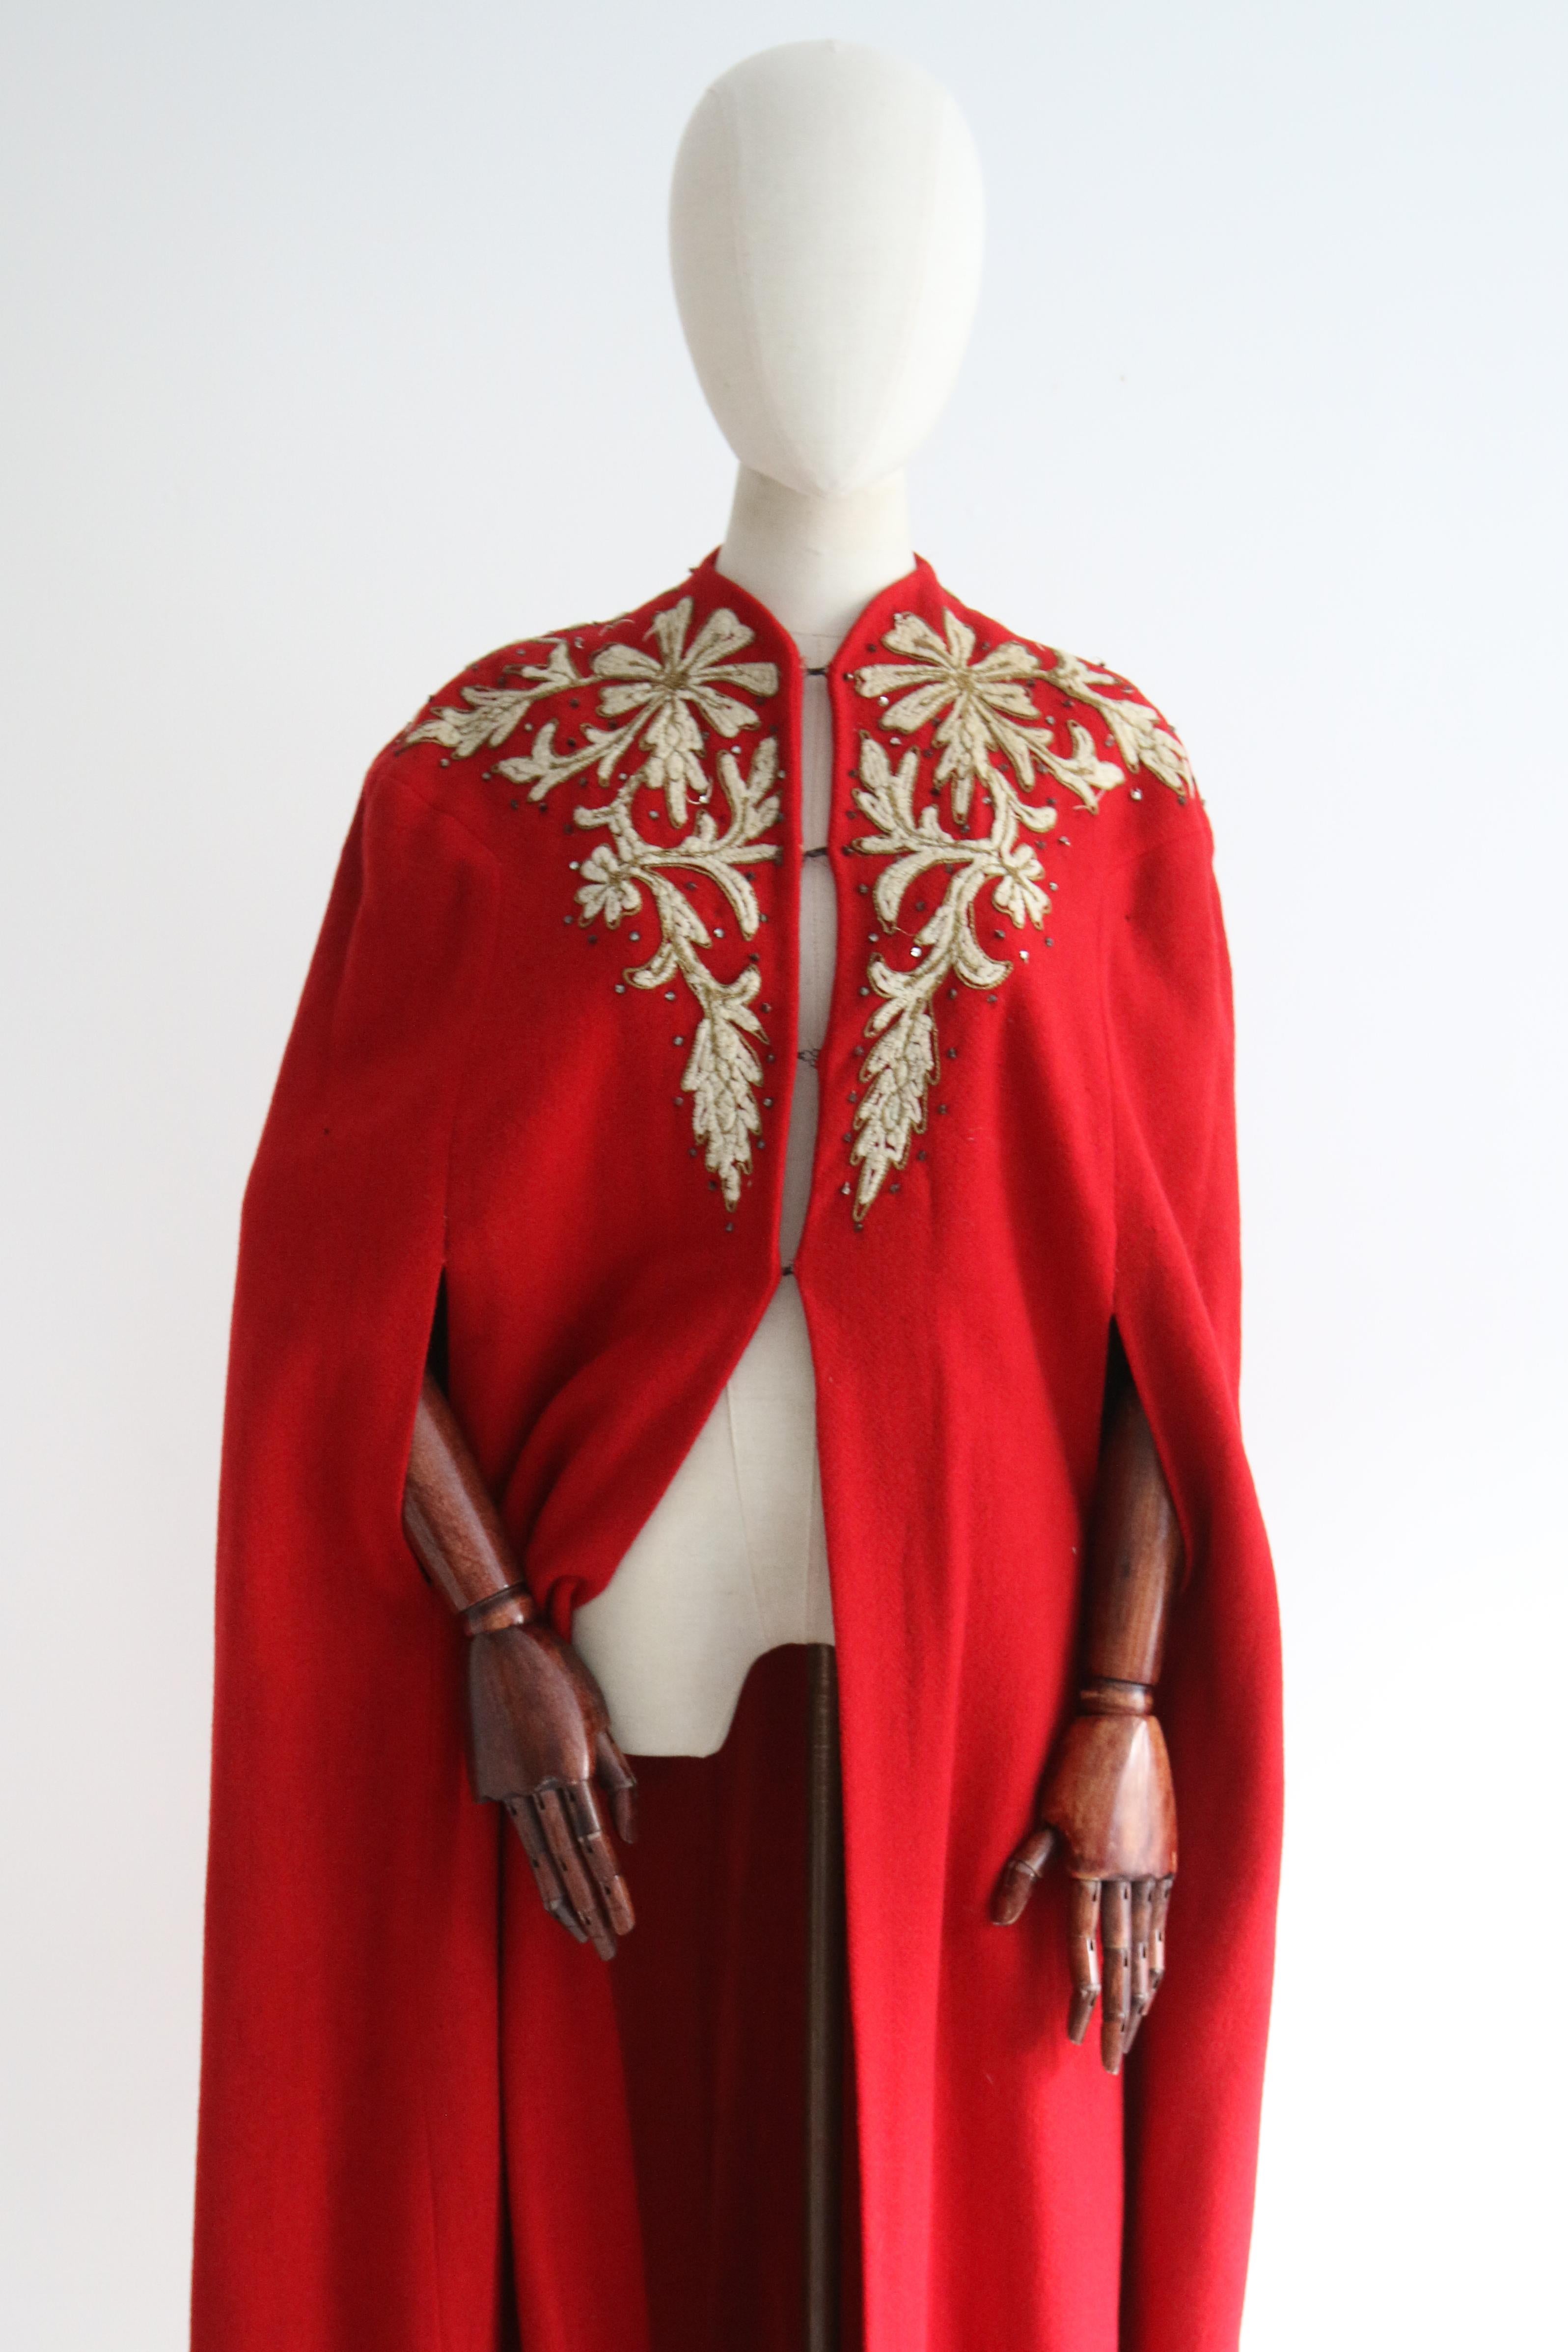 The most majestic and eye-catching cape you could ever set your eyes upon. Rendered in vibrant shade of red wool and decorated with cream wool soutache embroidery, edged with gold lamé soutache embroidery, in a trailing floral design, and finished